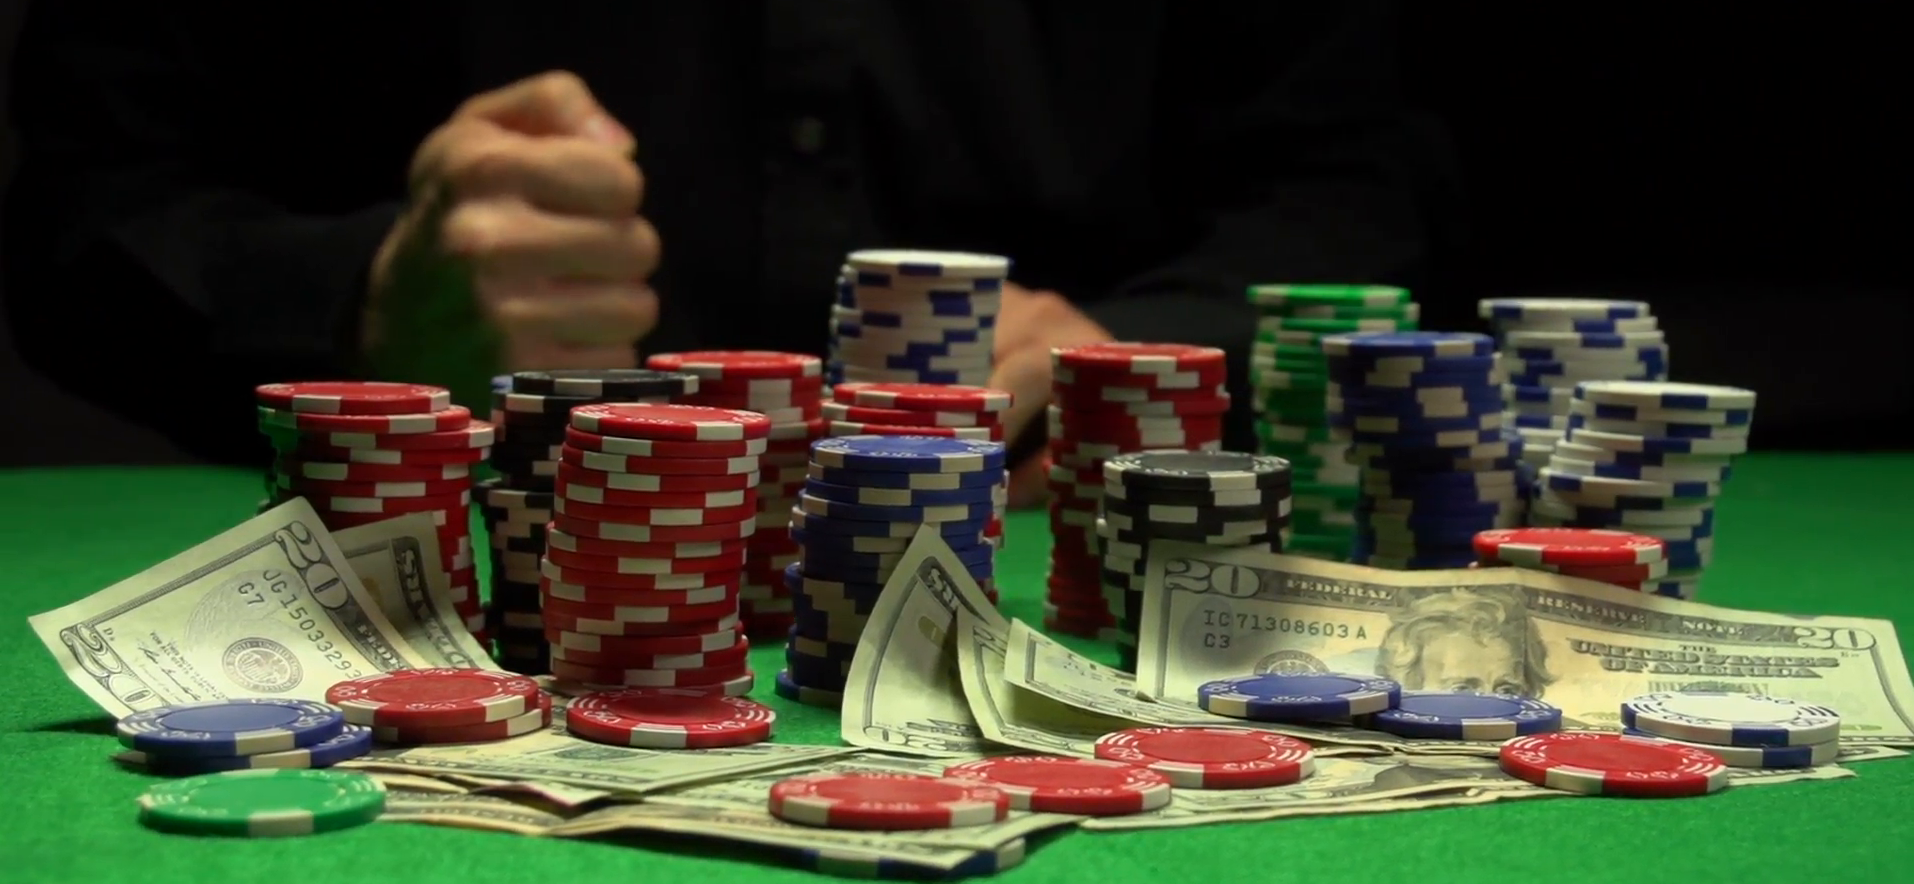 how to become a poker player professional